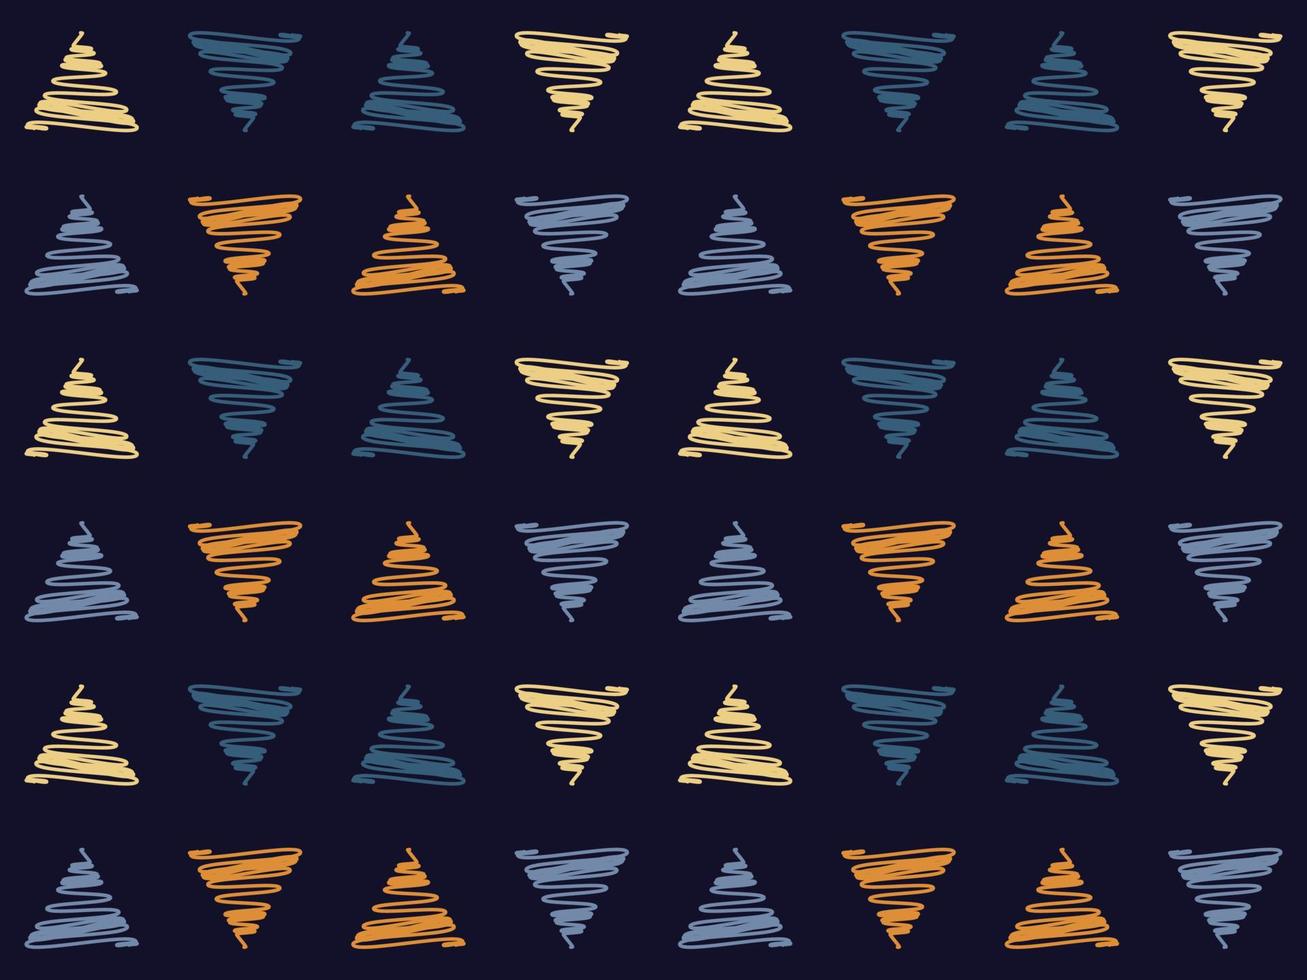 Triangle Dotted fabric Seamless Pattern Native American Design Geometric African American oriental traditional vector illustrations. Embroidery style.